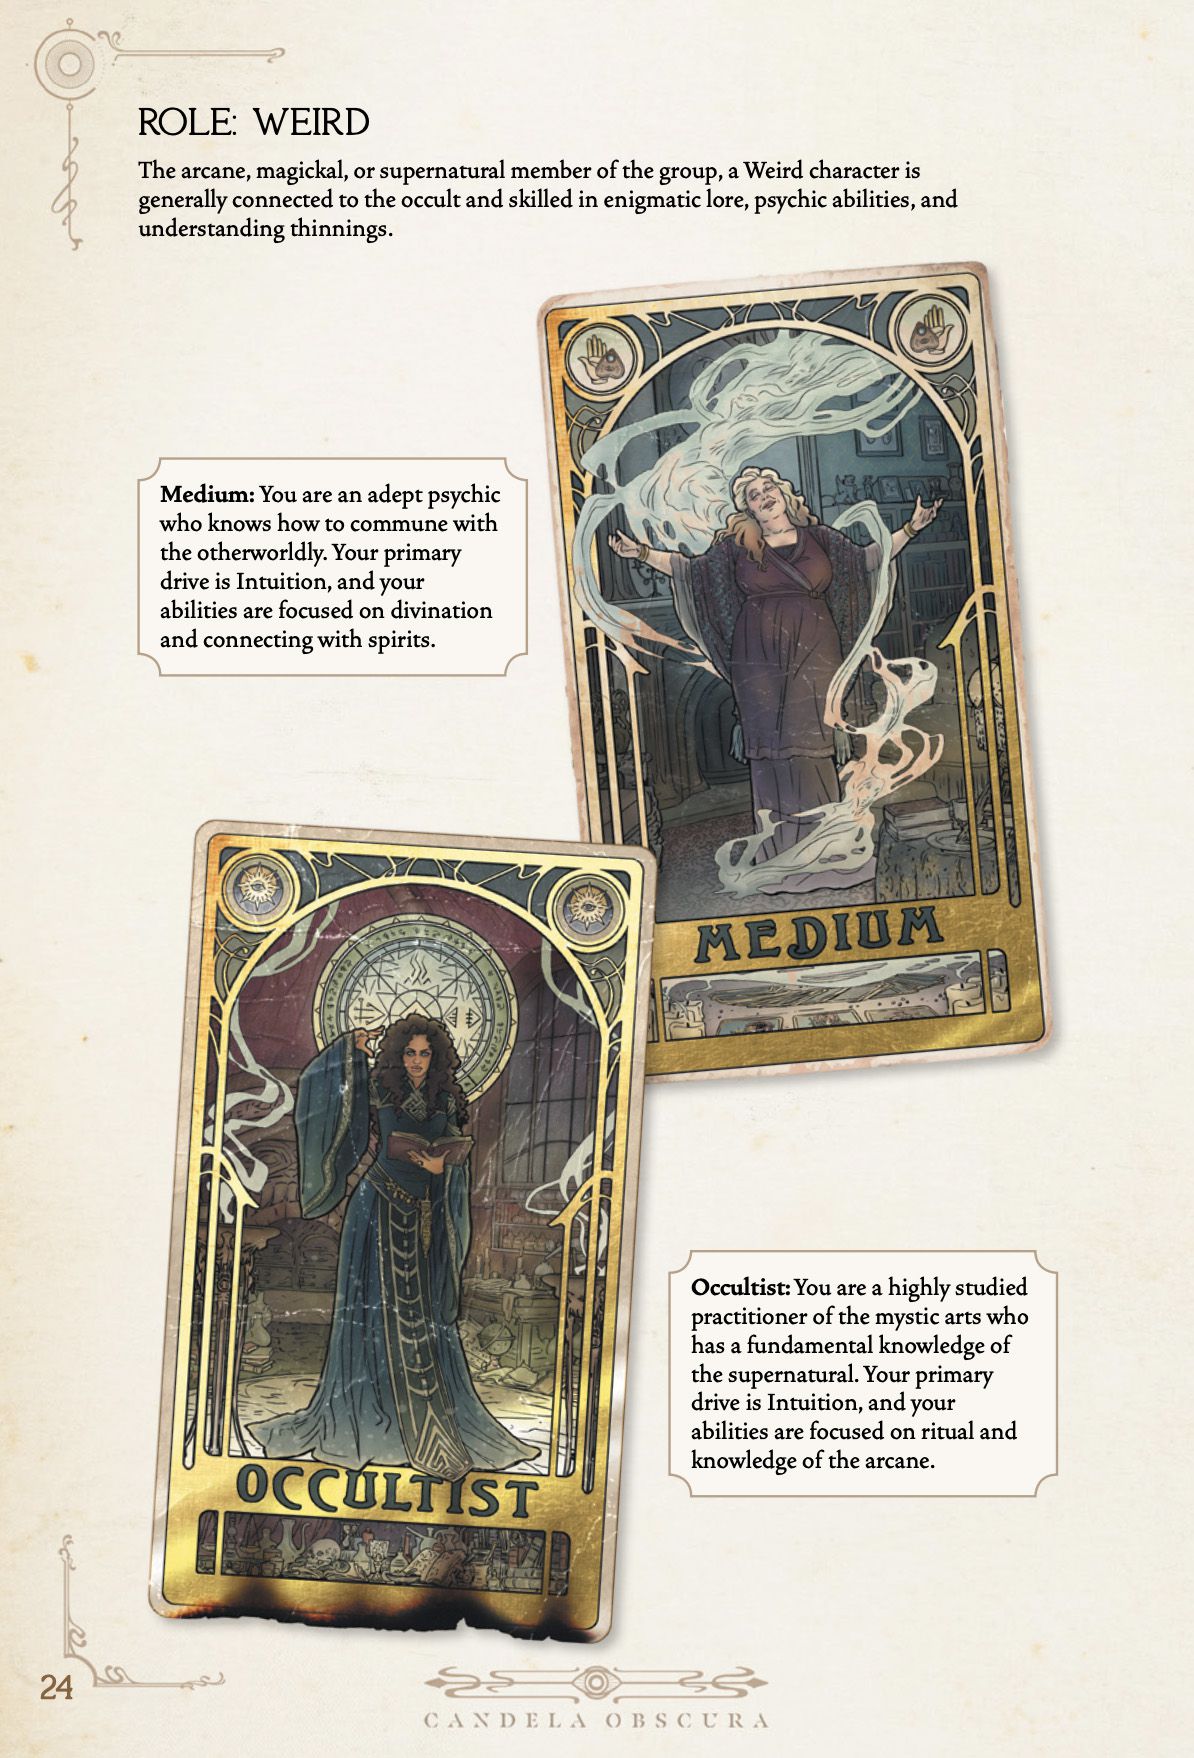 A single page from the Candela Obscura rulebook featuring weird roles, specialties like the medium and the occultist.